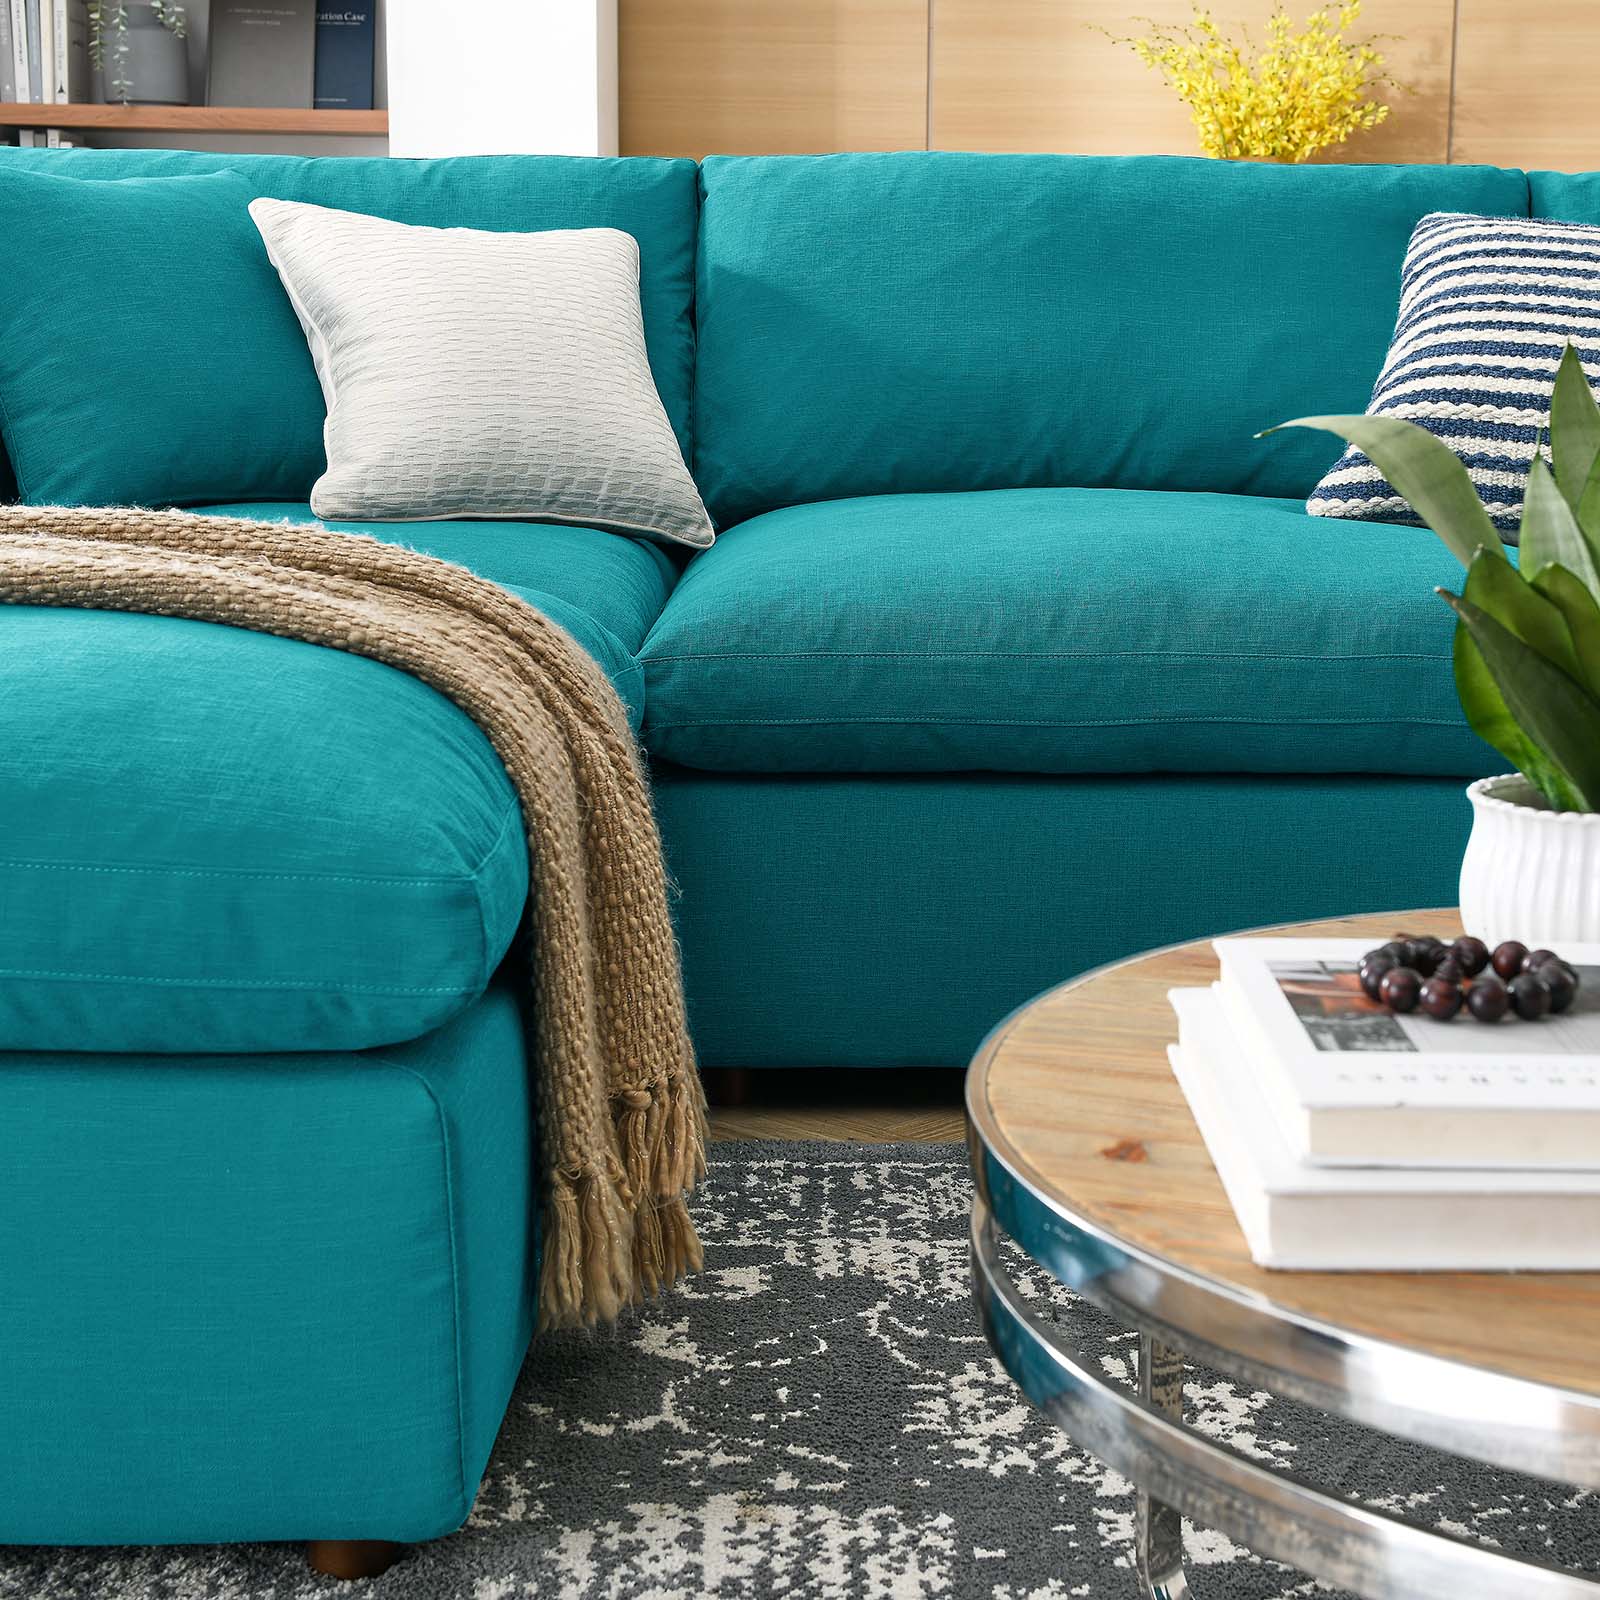 Modway Sectional Sofas - Commix Down Filled Overstuffed 6 Piece Sectional Sofa Set Teal